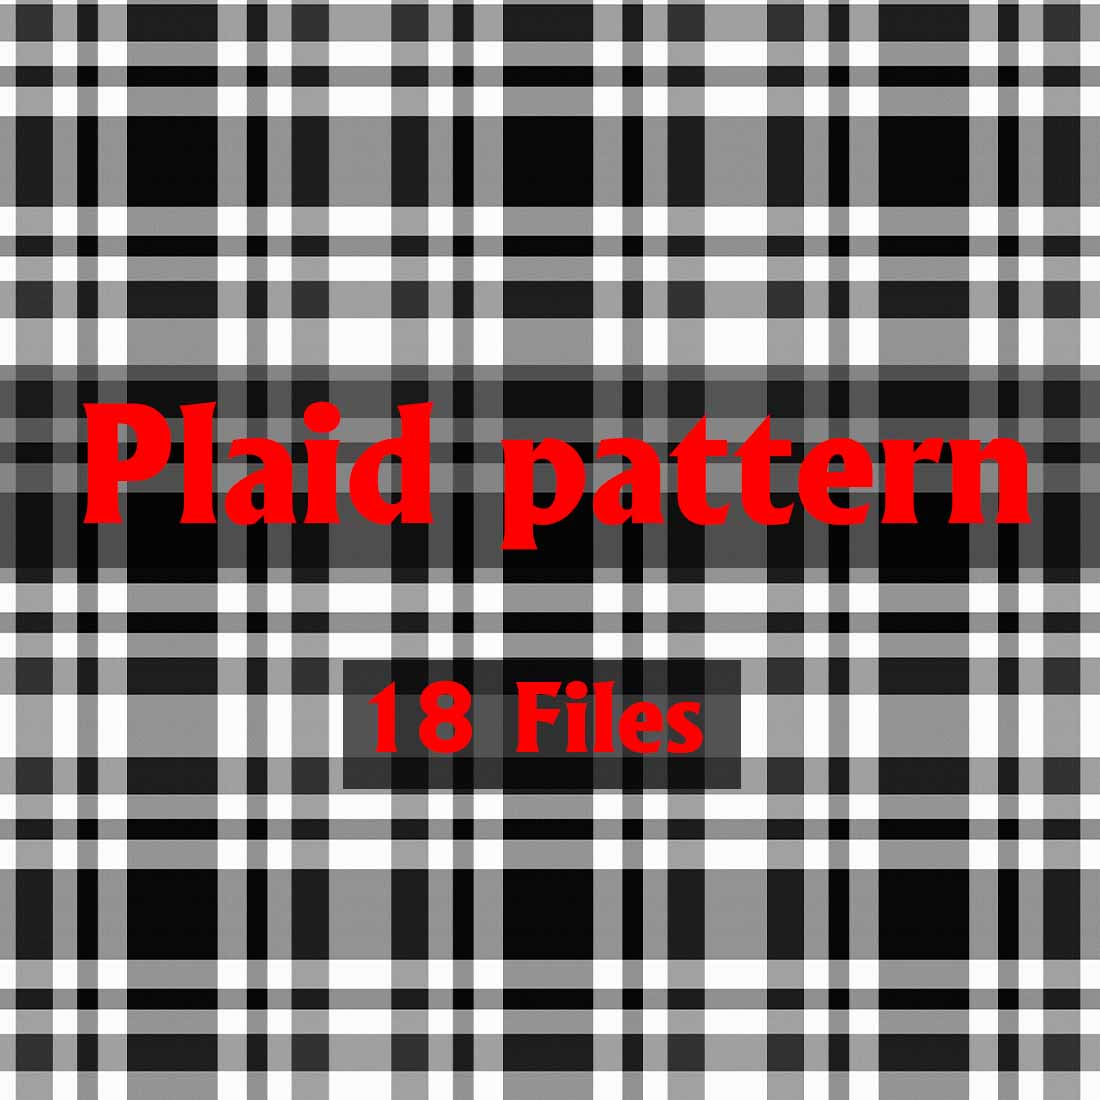 Plaid pattern Flannel fabric texture cover image.